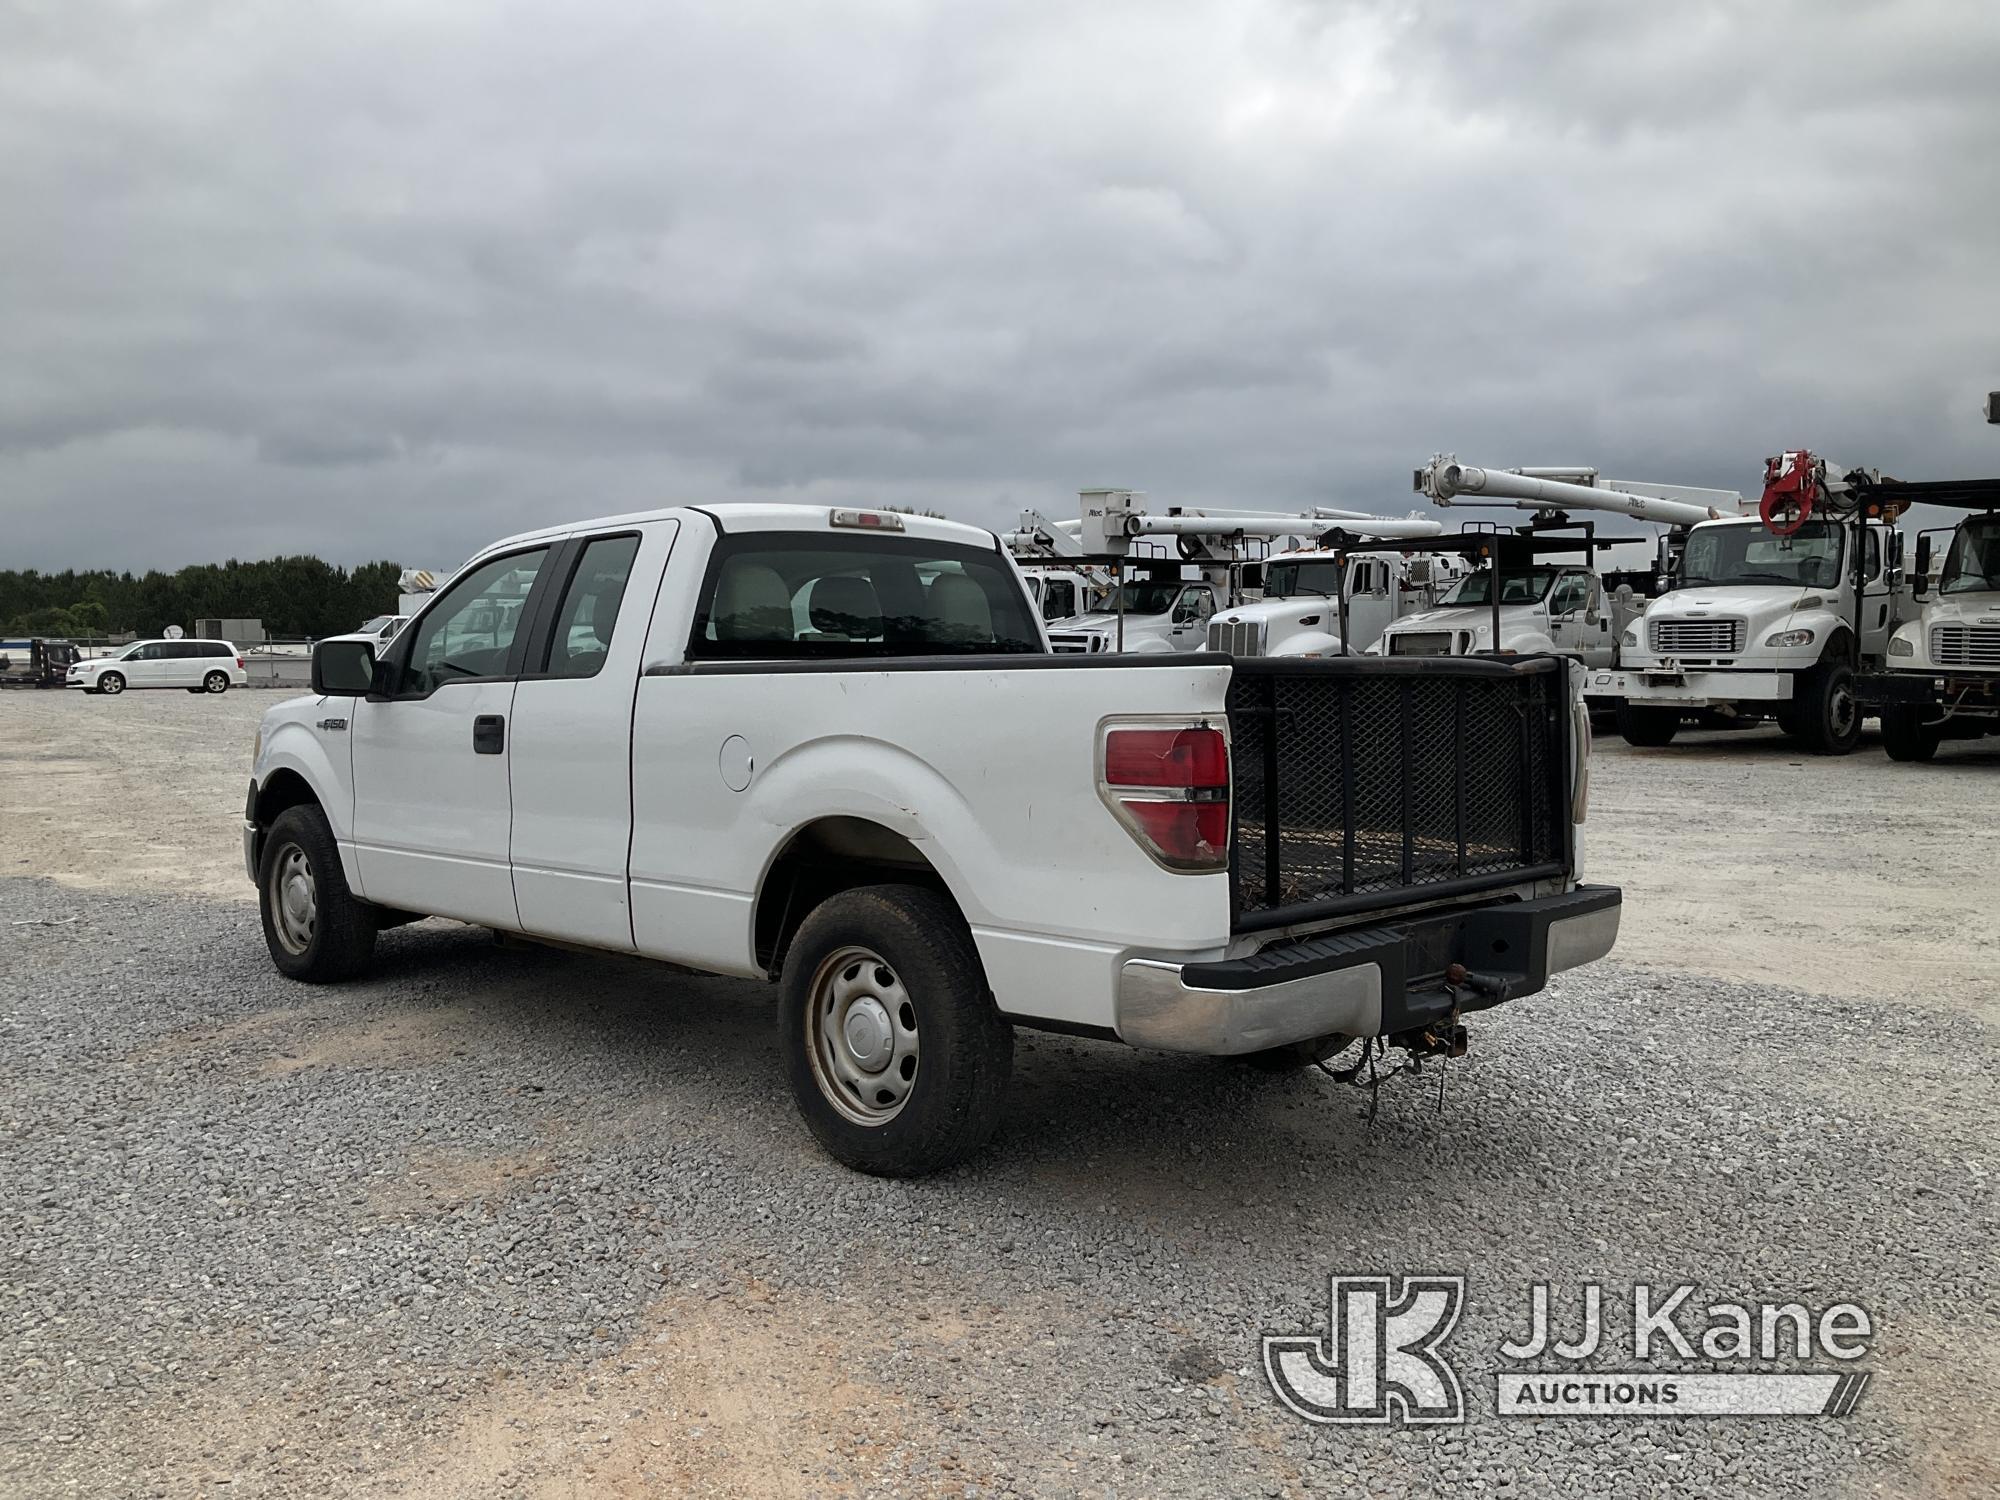 (Villa Rica, GA) 2010 Ford F150 Extended-Cab Pickup Truck Runs & Moves) (Jump To Start, Check Engine